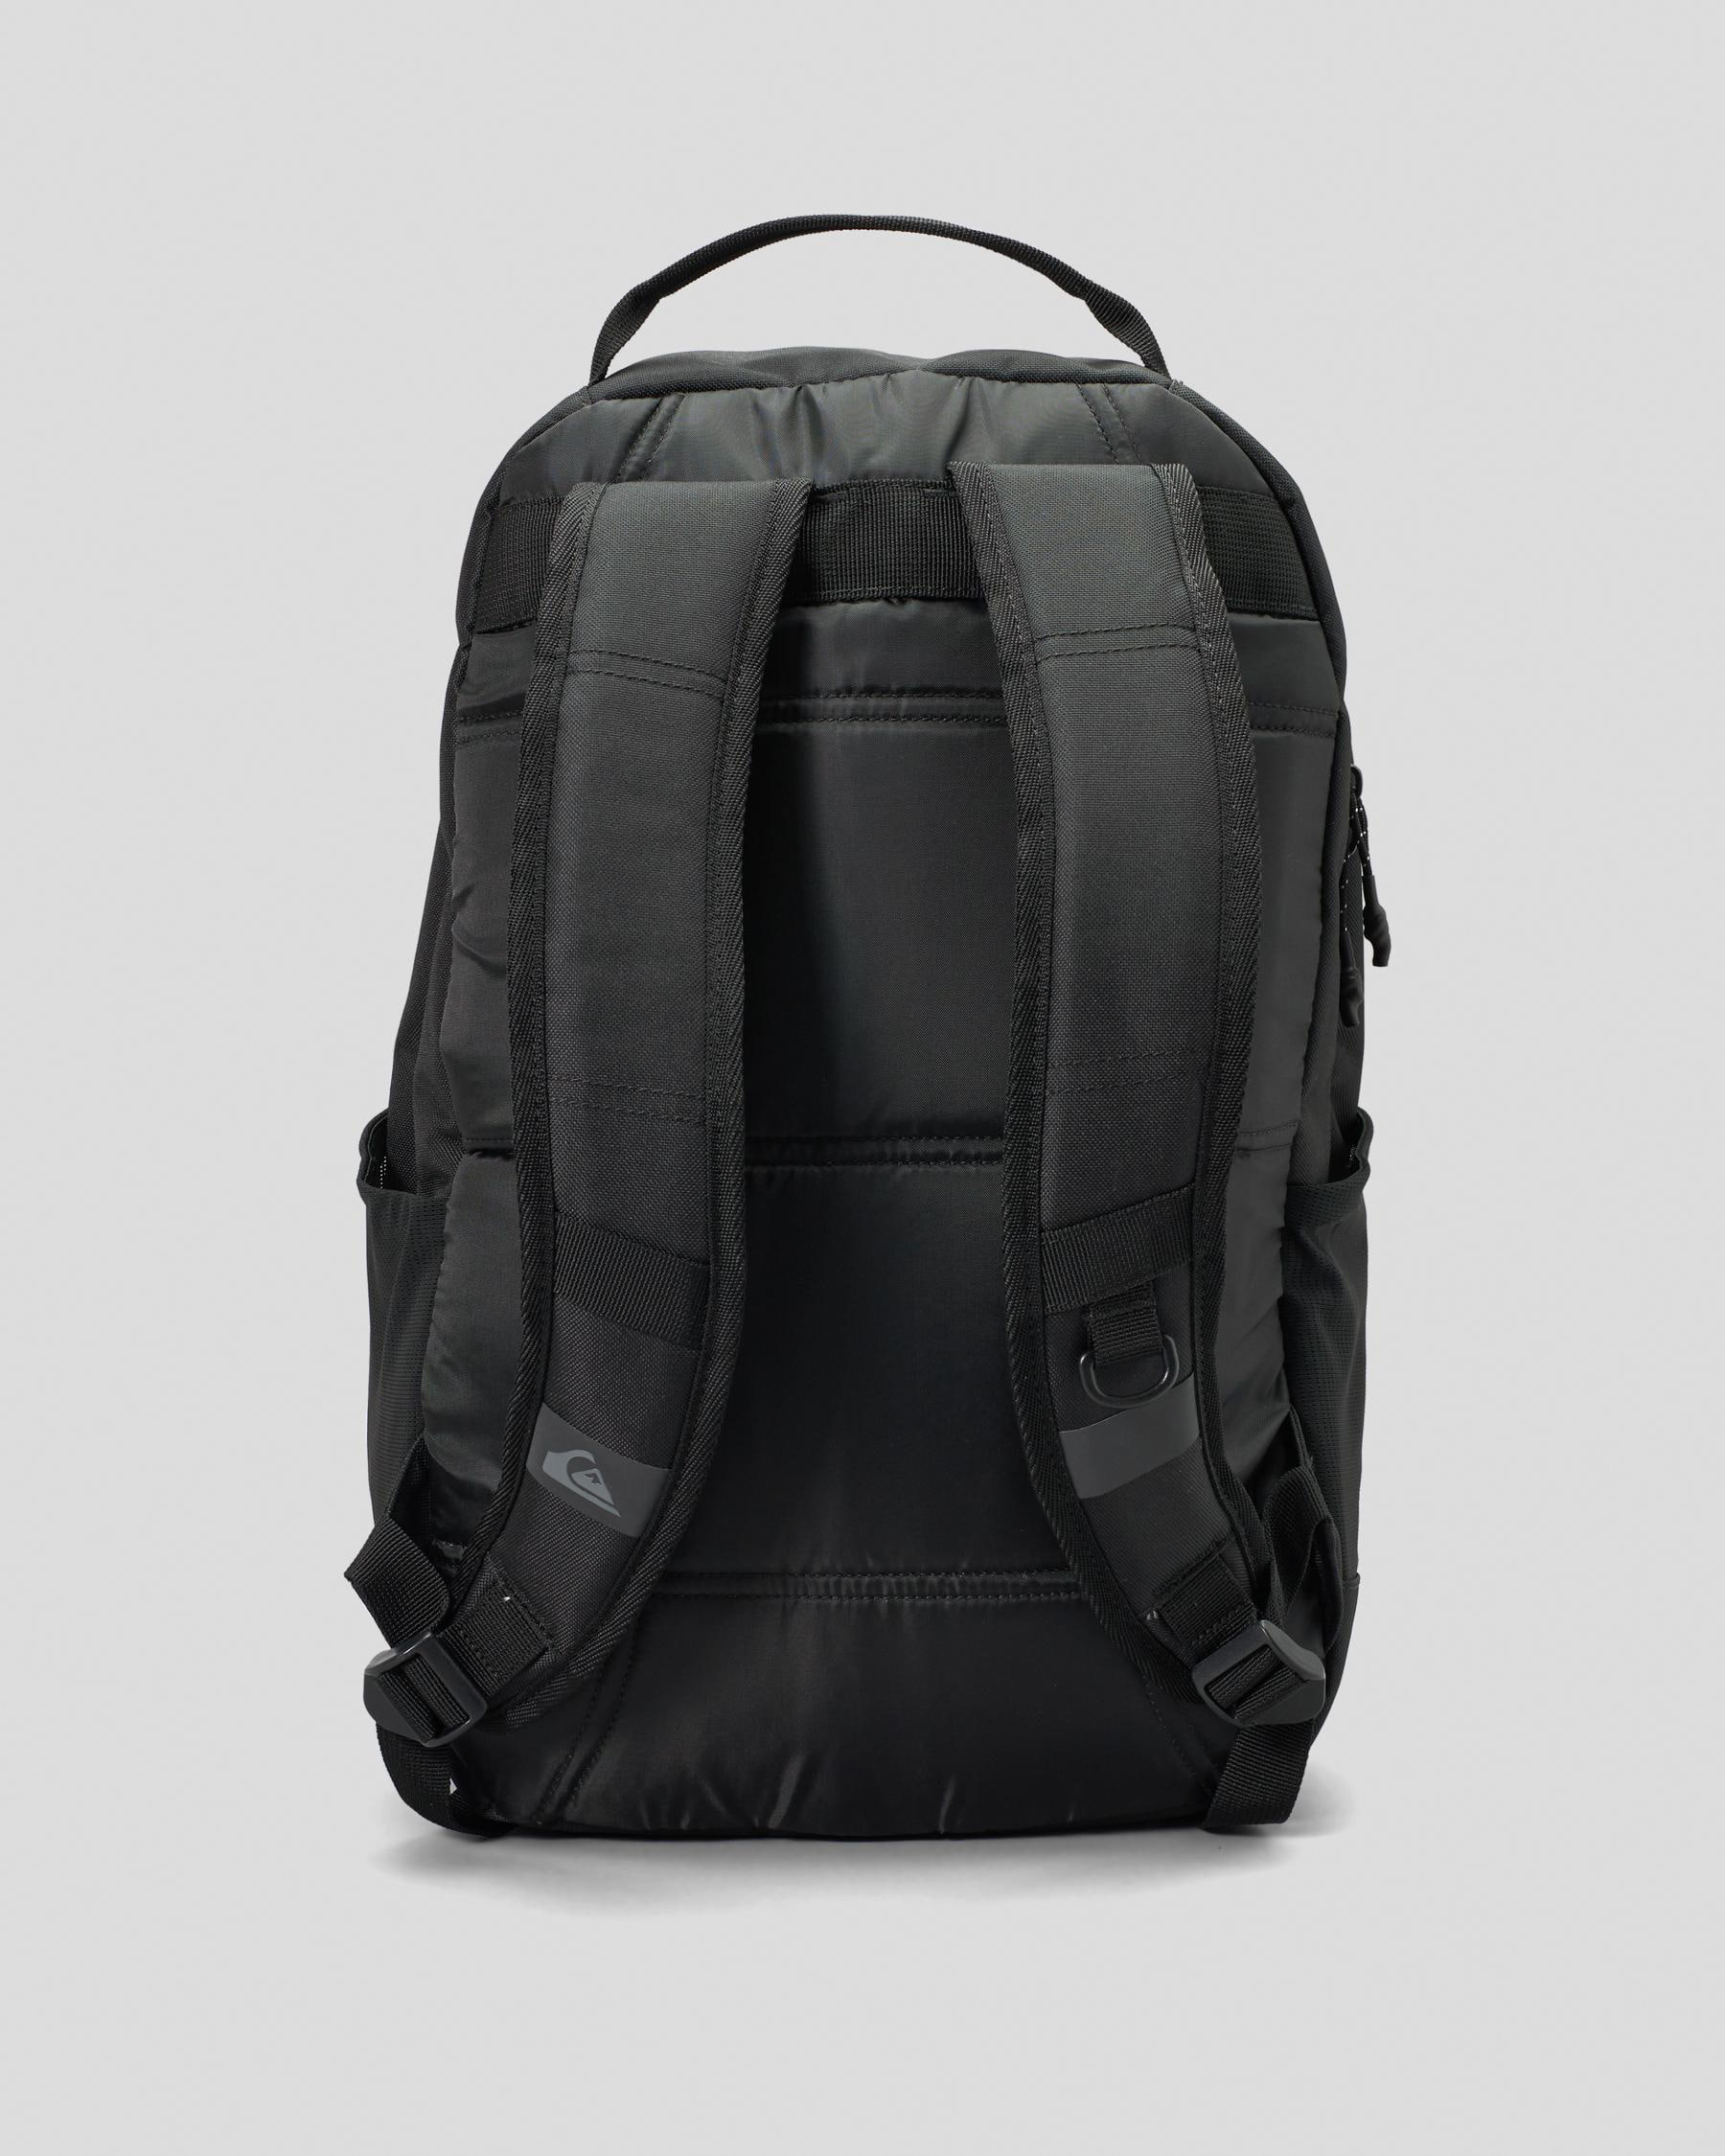 Quiksilver Schoolie 2.0 Backpack In Black - FREE* Shipping & Easy ...